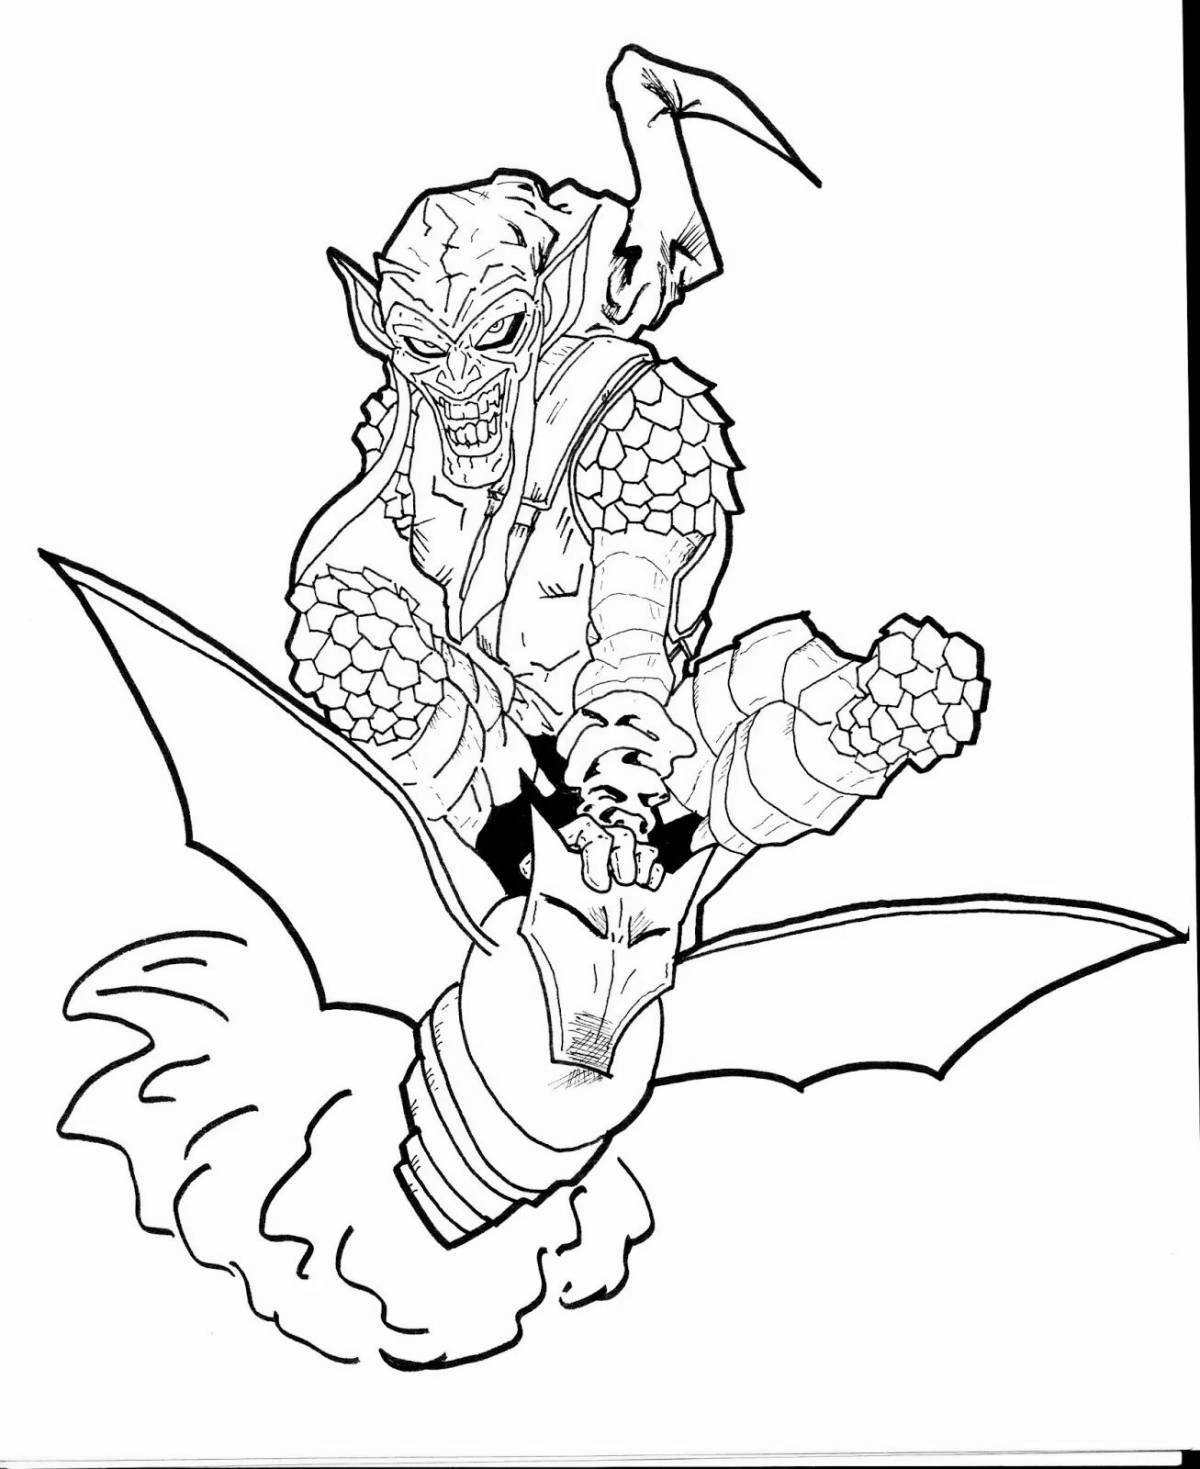 Spiderman and Goblin amazing coloring book